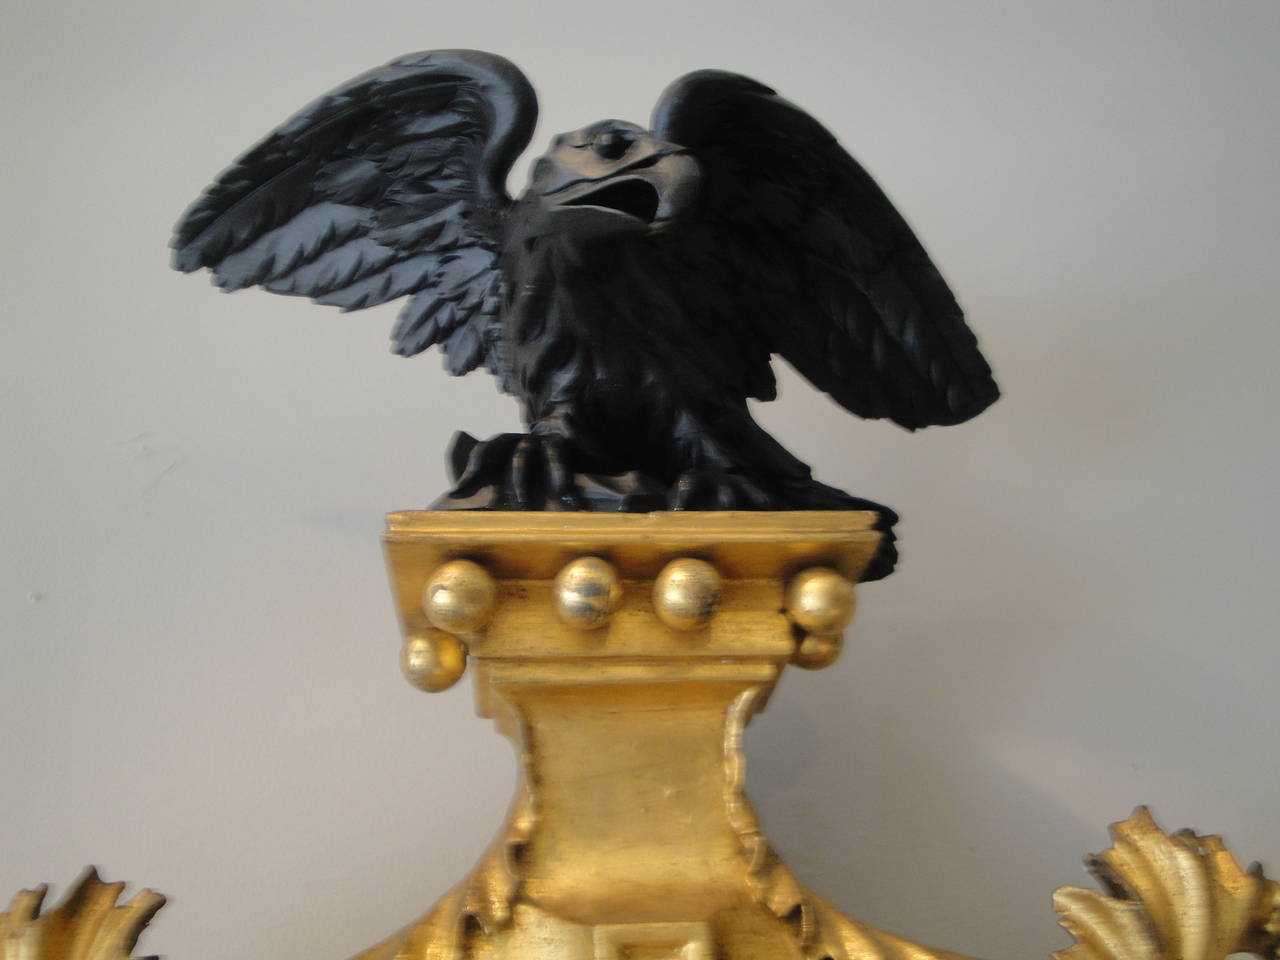 English Regency convex mirror, gilded and ebonized with eagle and acanthus leaves.